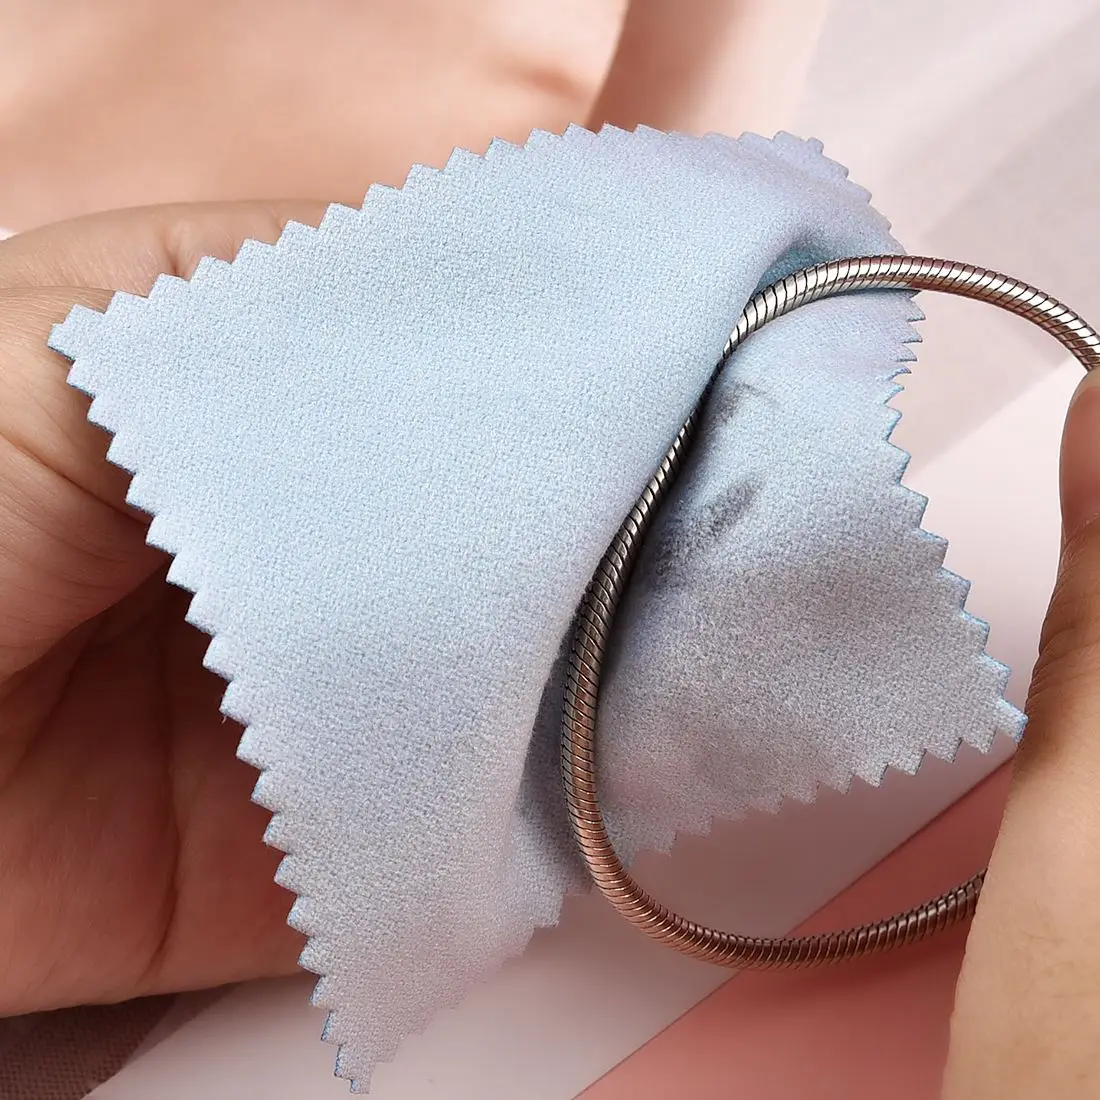 50pcs 10x6.5cm/10x6cm/8x6cm Silver Clean Polishing Cloth Soft Clean Wipe Wiping Cloth For Necklaces Rings Jewelry Clean Tools